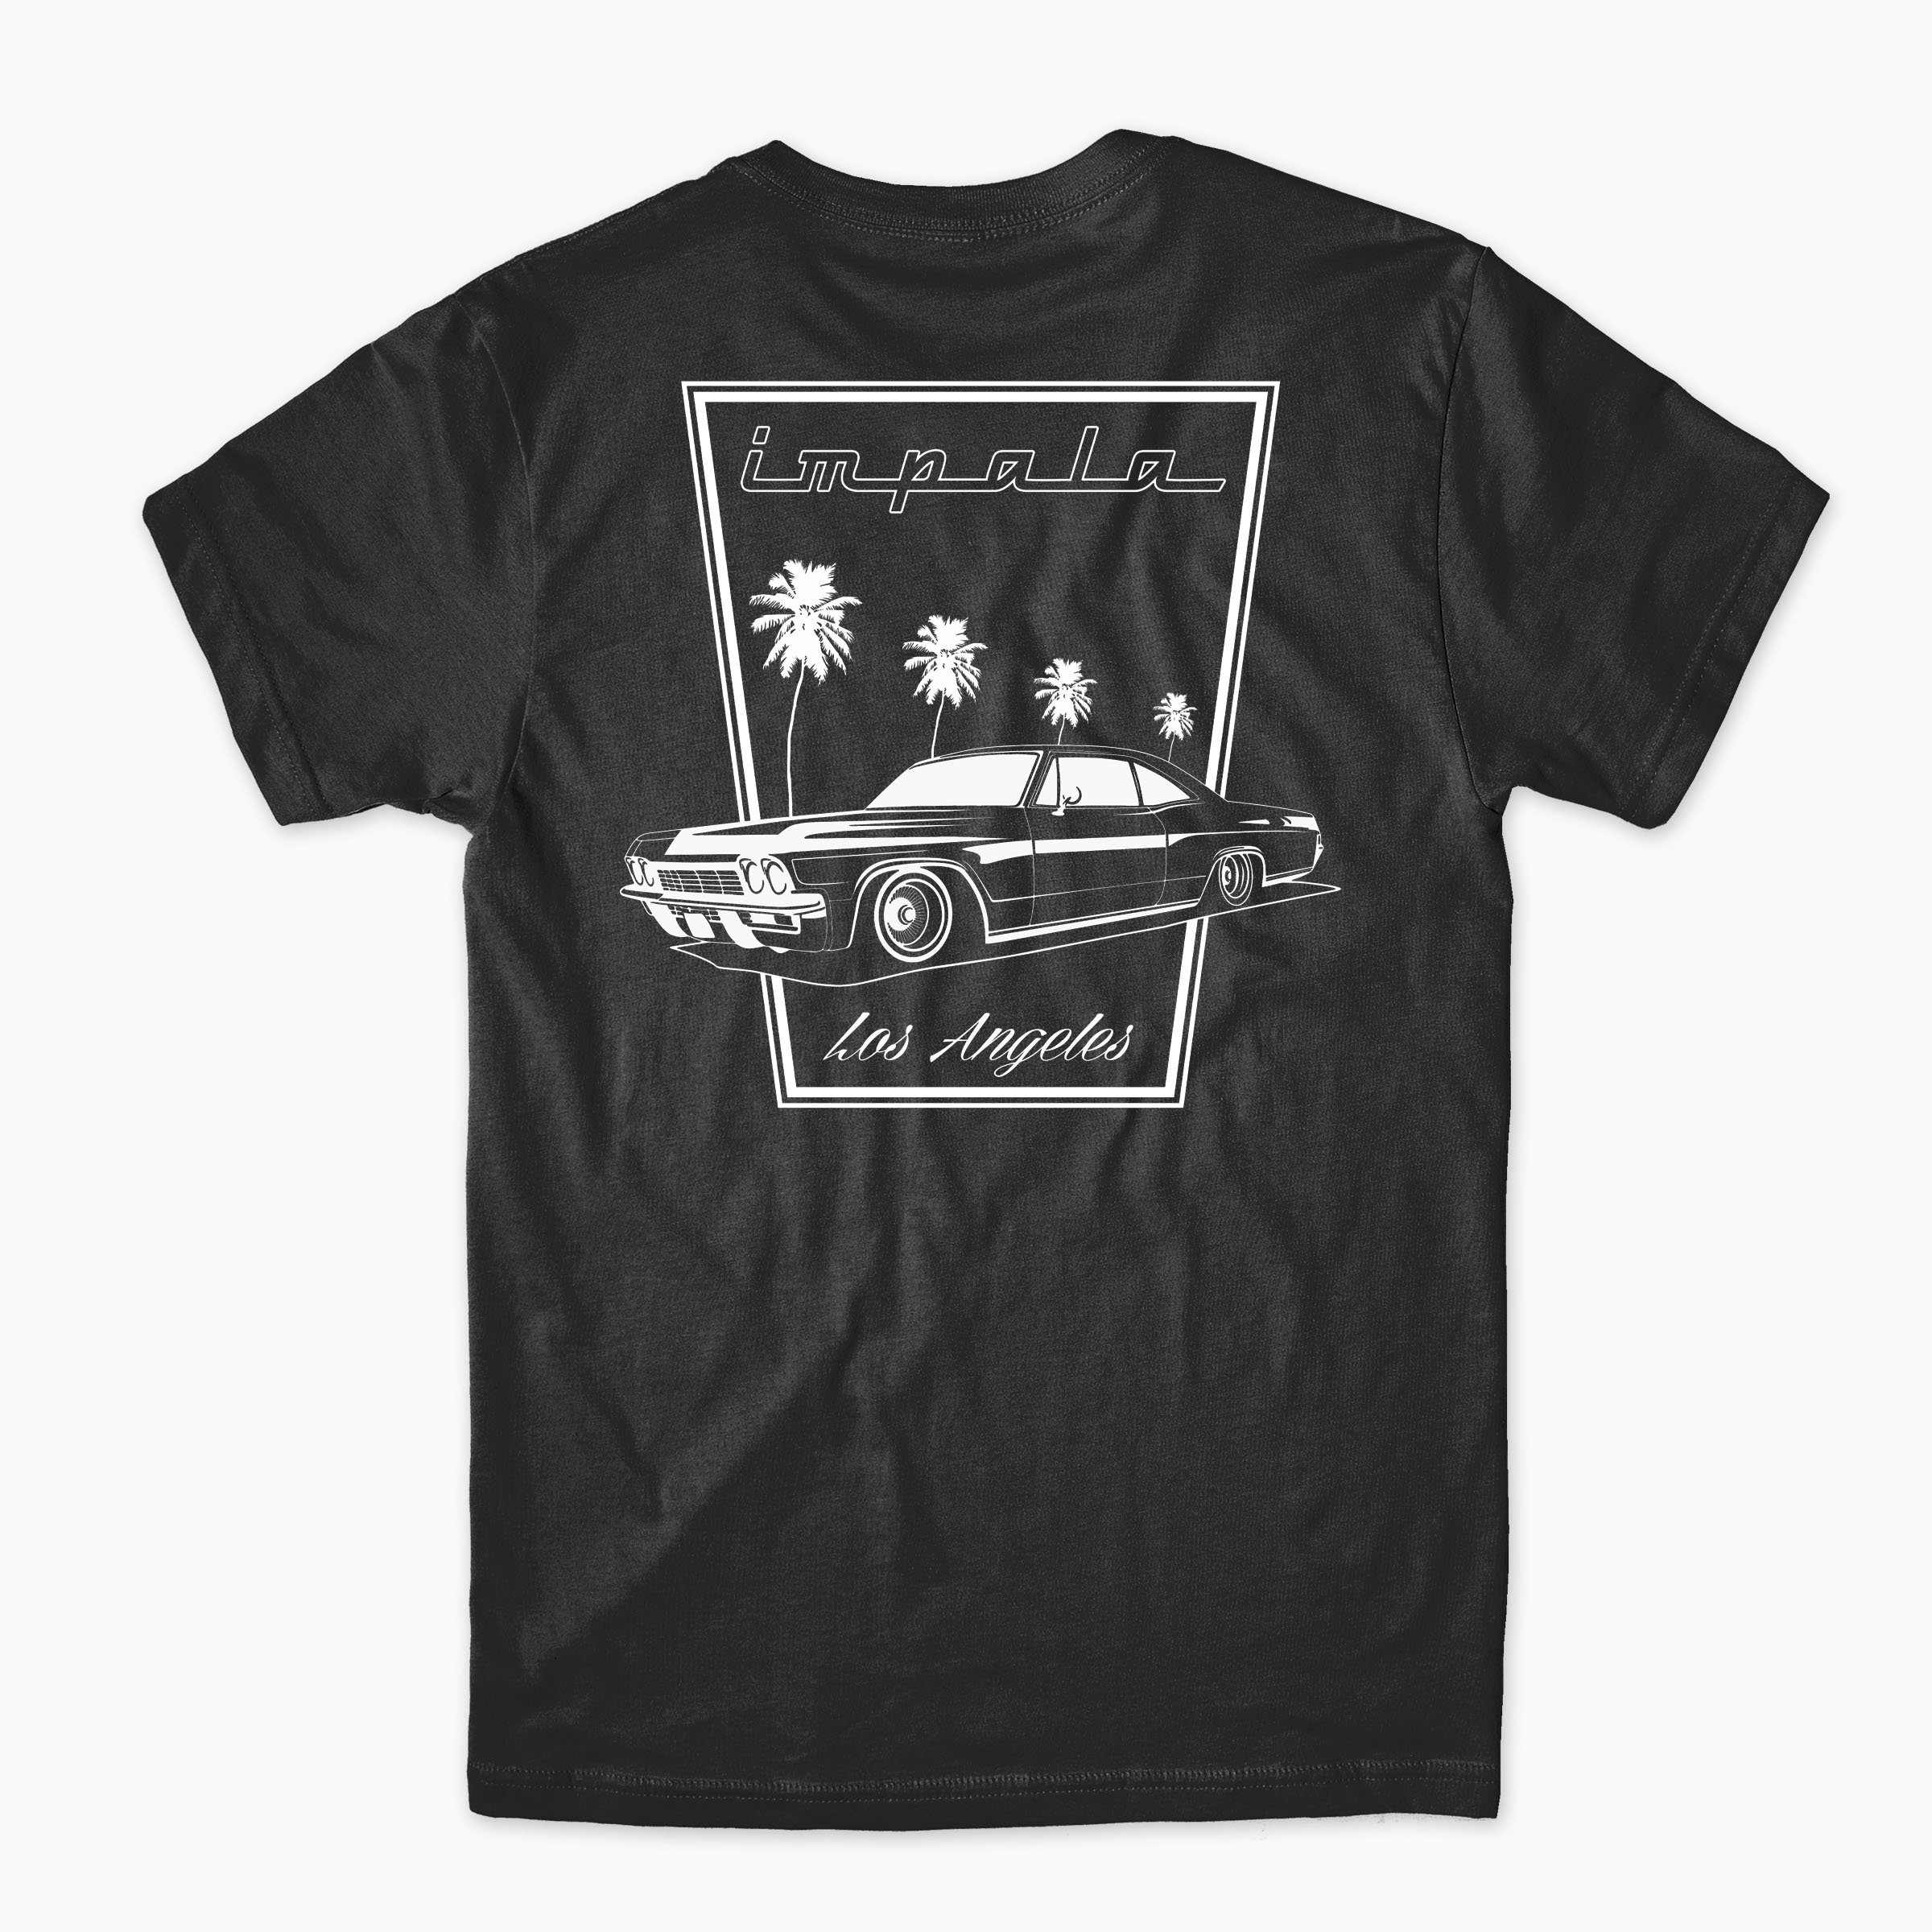 Classic Car Tshirt Muscle Car Tee Route 66 Unisex T-Shirt Chevy 65-70 Chevrolet Impala SS Gift for Birthday 1965 Chevy Impala SS